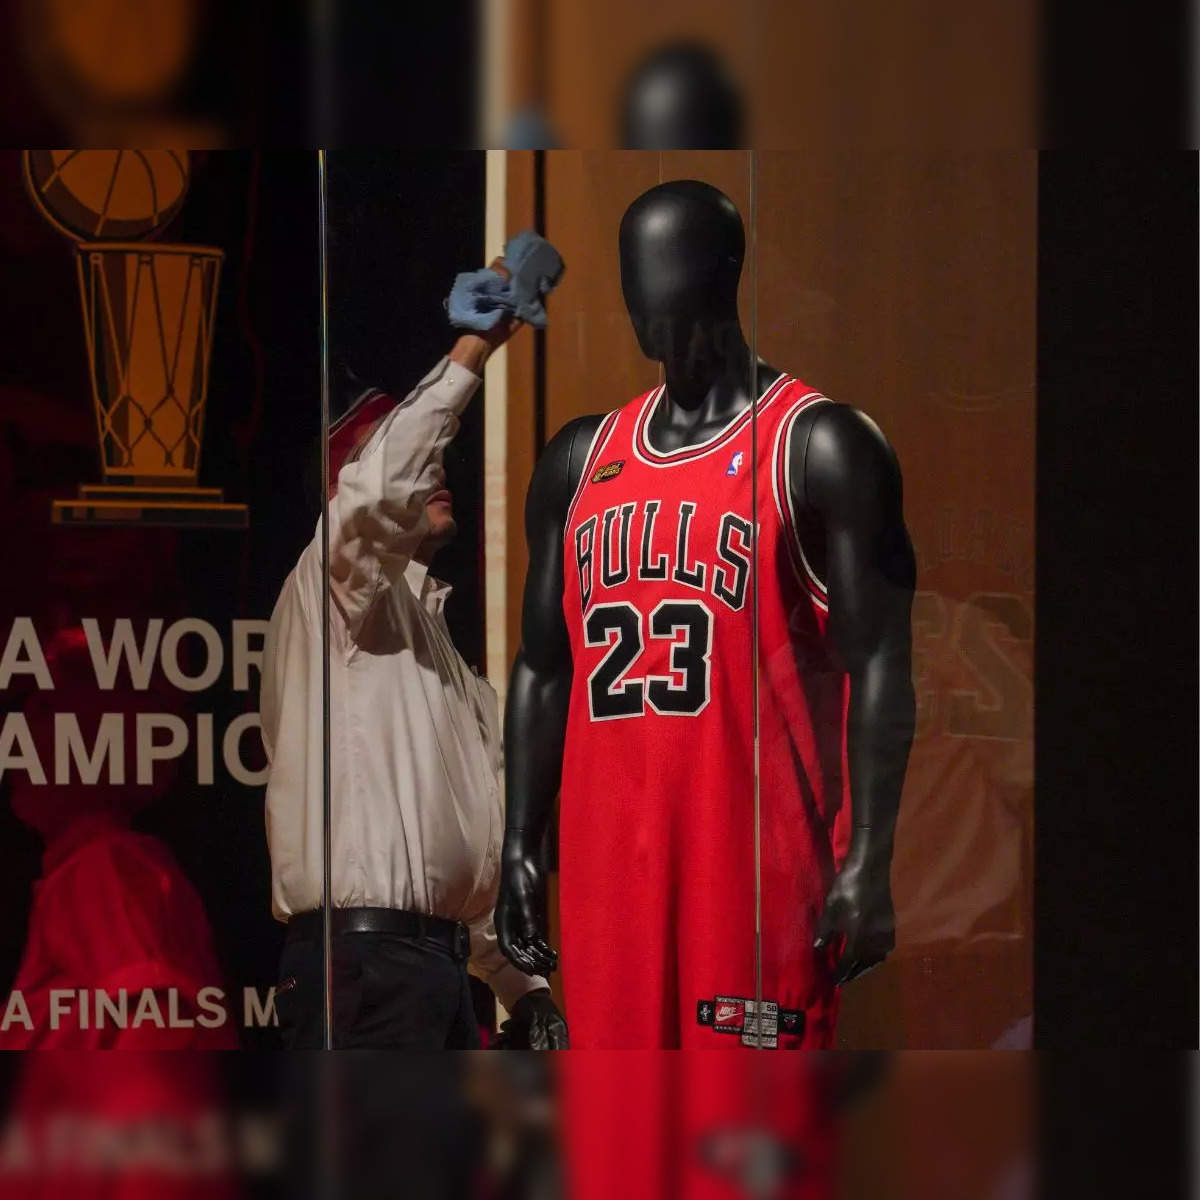 Jersey worn by basketball legend Michael Jordan during 1998 NBA Finals  sells for $10.1 mn - The Economic Times